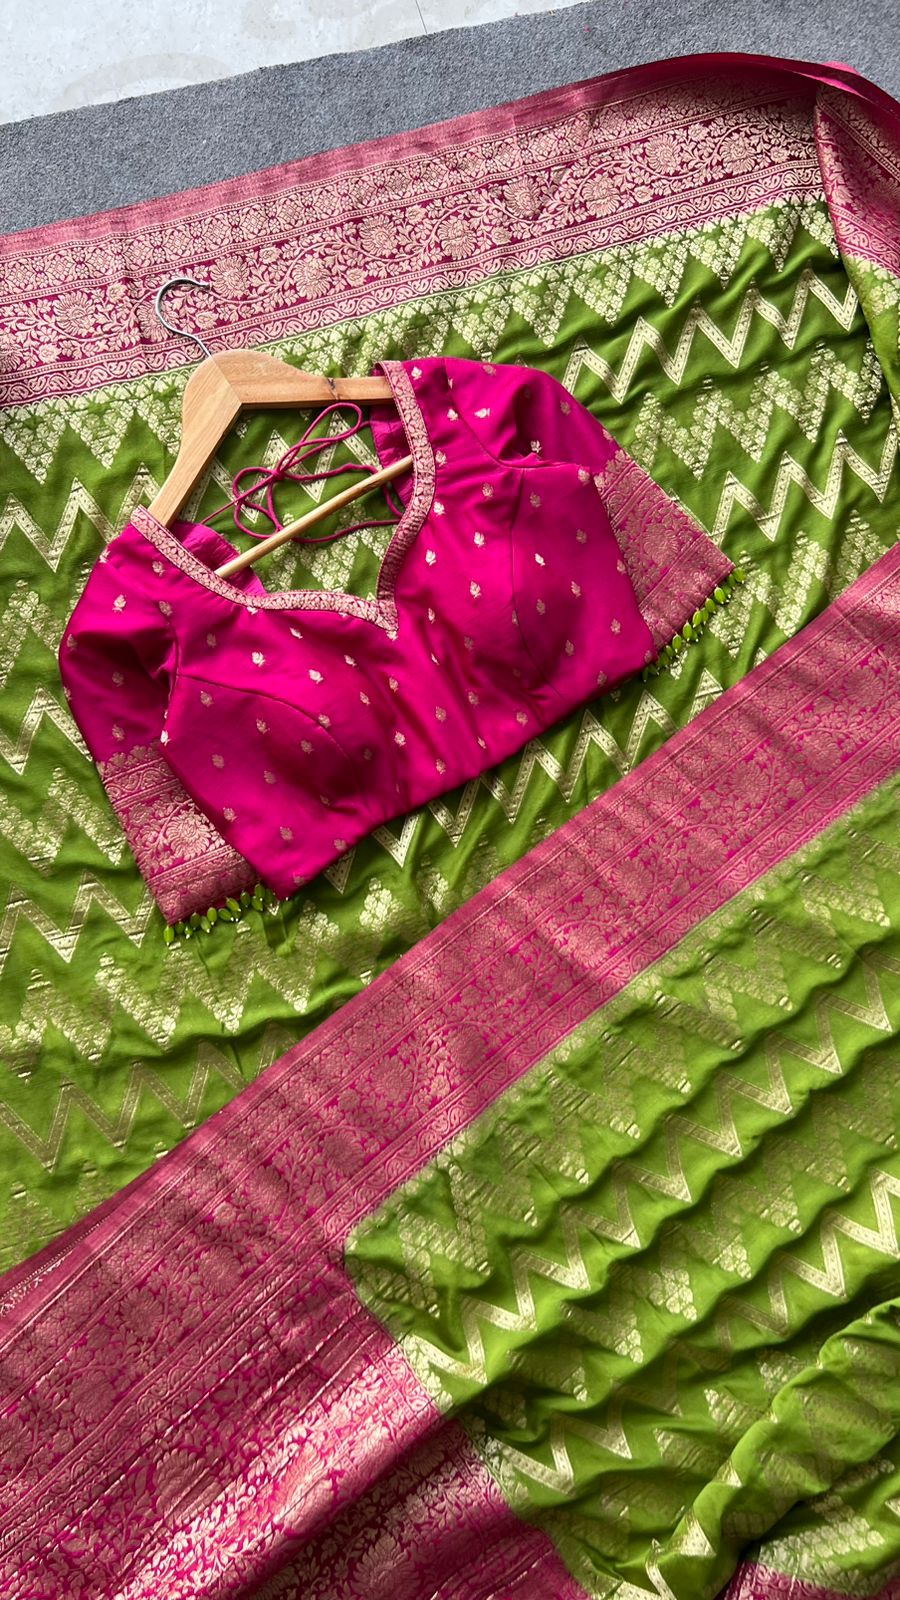 Parrot Green georgette banarasi saree with pink hand worked blouse